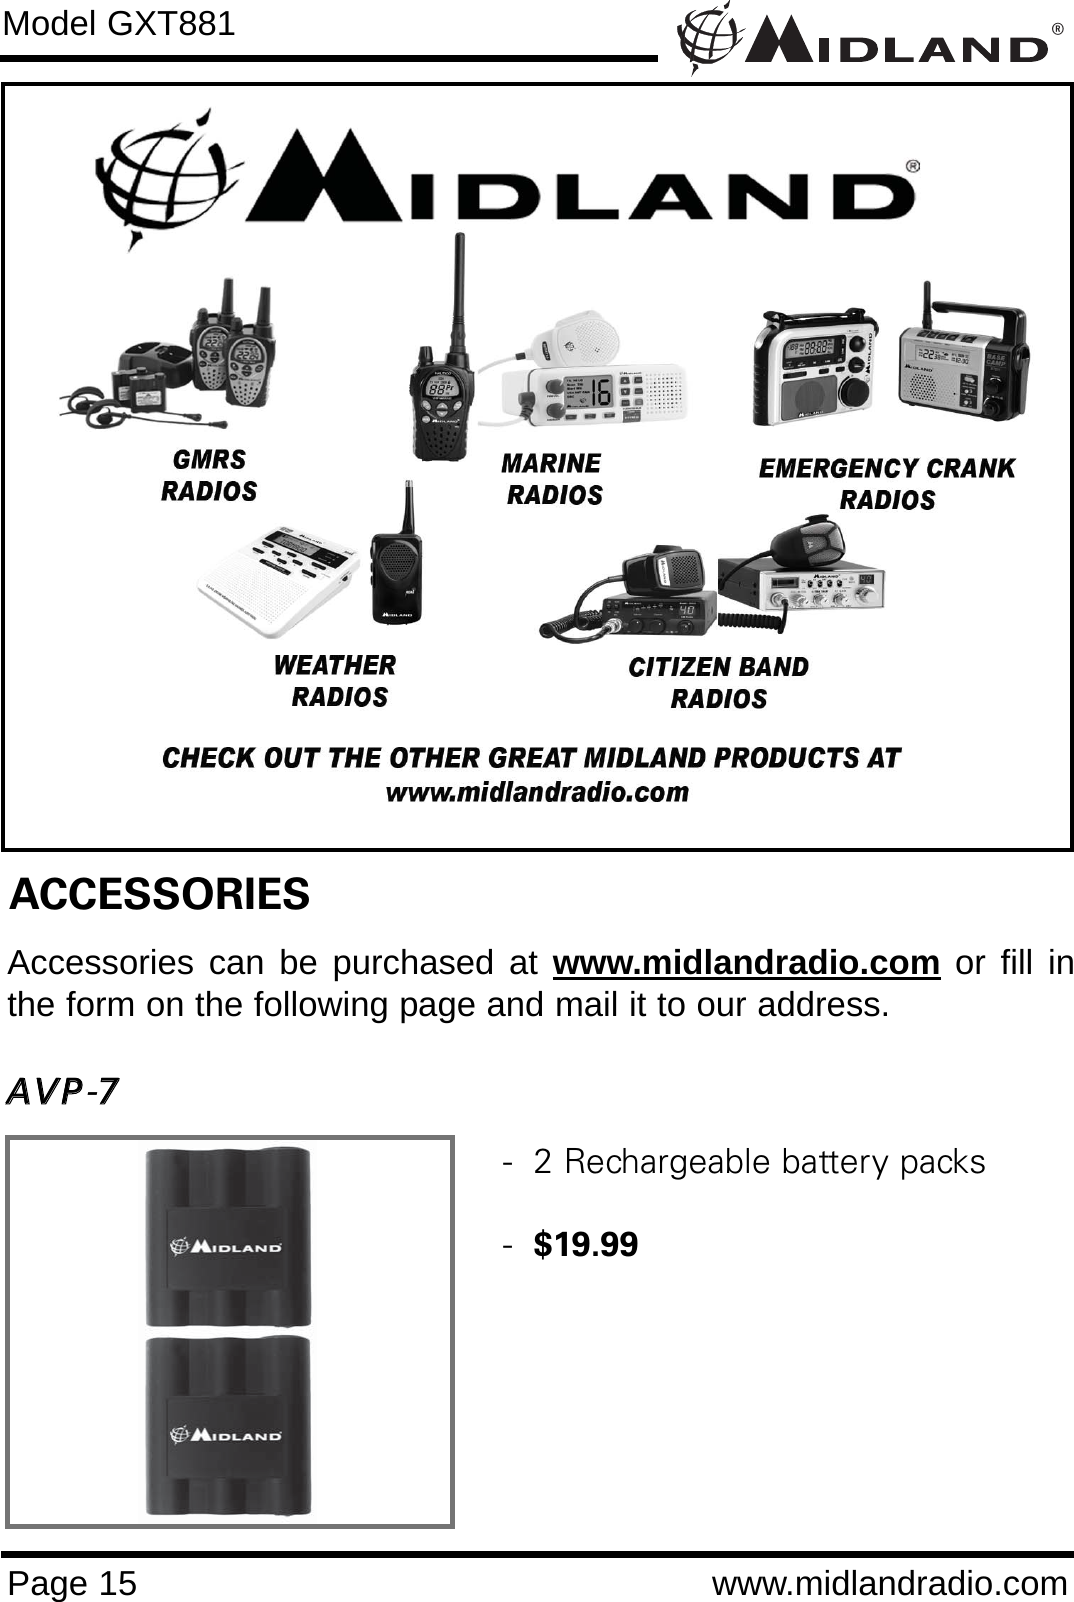 ®Page 15 www.midlandradio.comModel GXT881ACCESSORIESAccessories can be purchased at www.midlandradio.com or fill inthe form on the following page and mail it to our address.AAVVPP-77-  2 Rechargeable battery packs-  $19.99